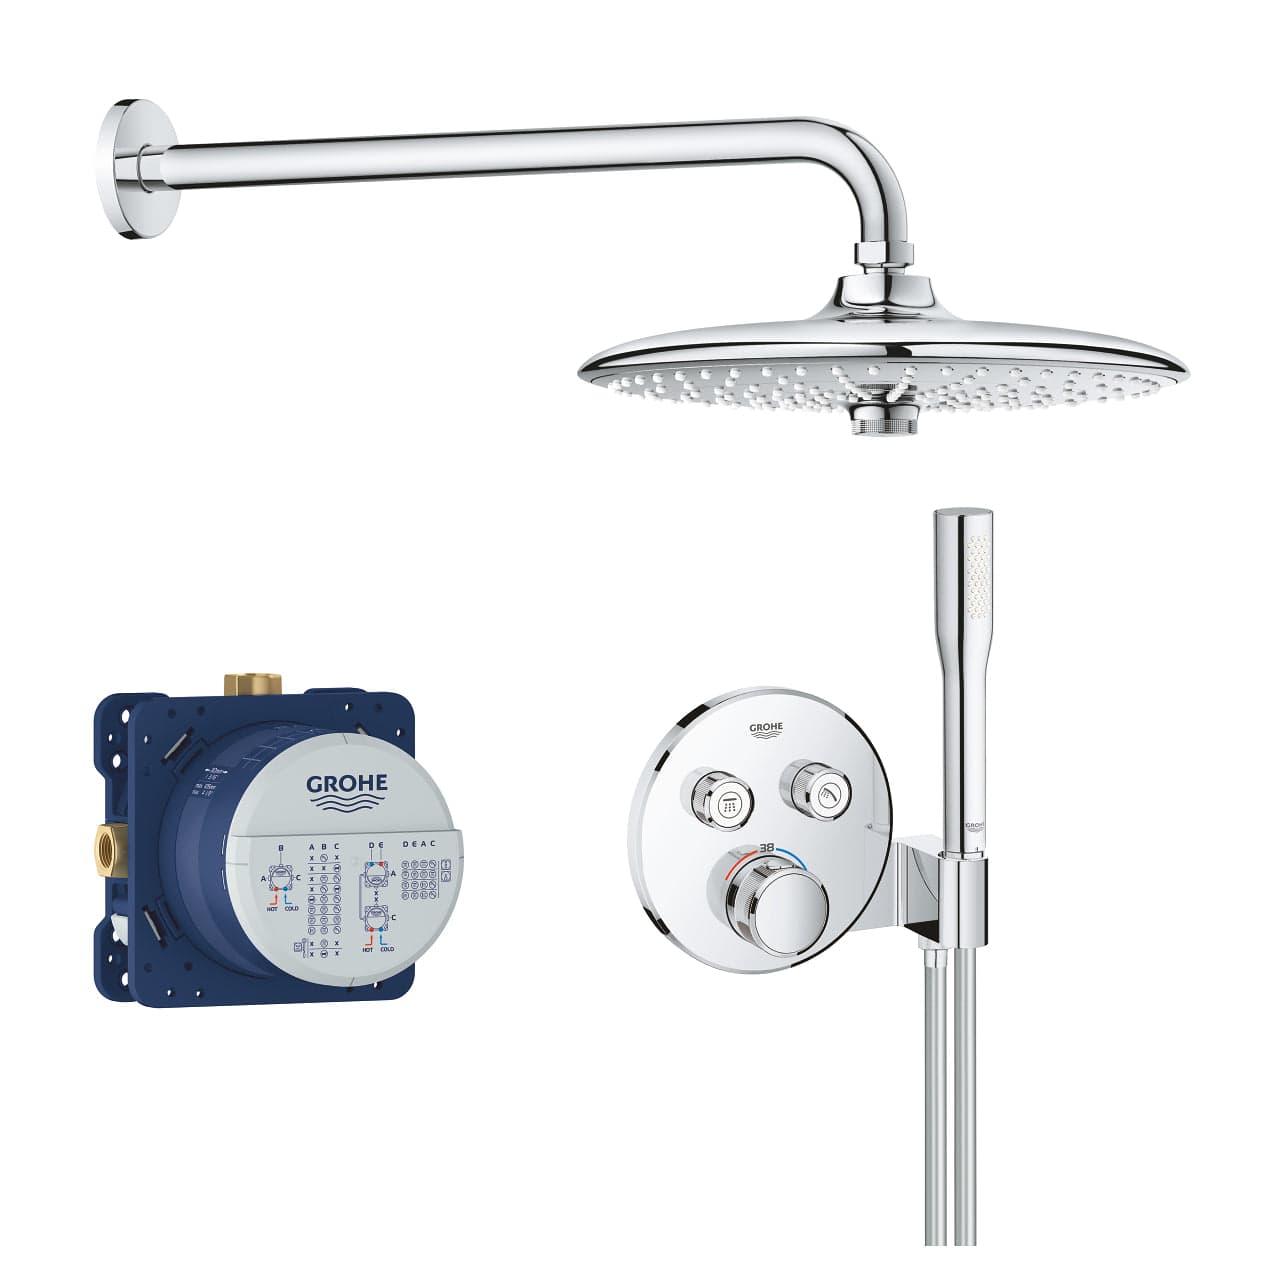 Grohe Grohtherm SmartControl Perfect Shower Set, Chrome | Supply Master | Accra, Ghana Shower Set Buy Tools hardware Building materials